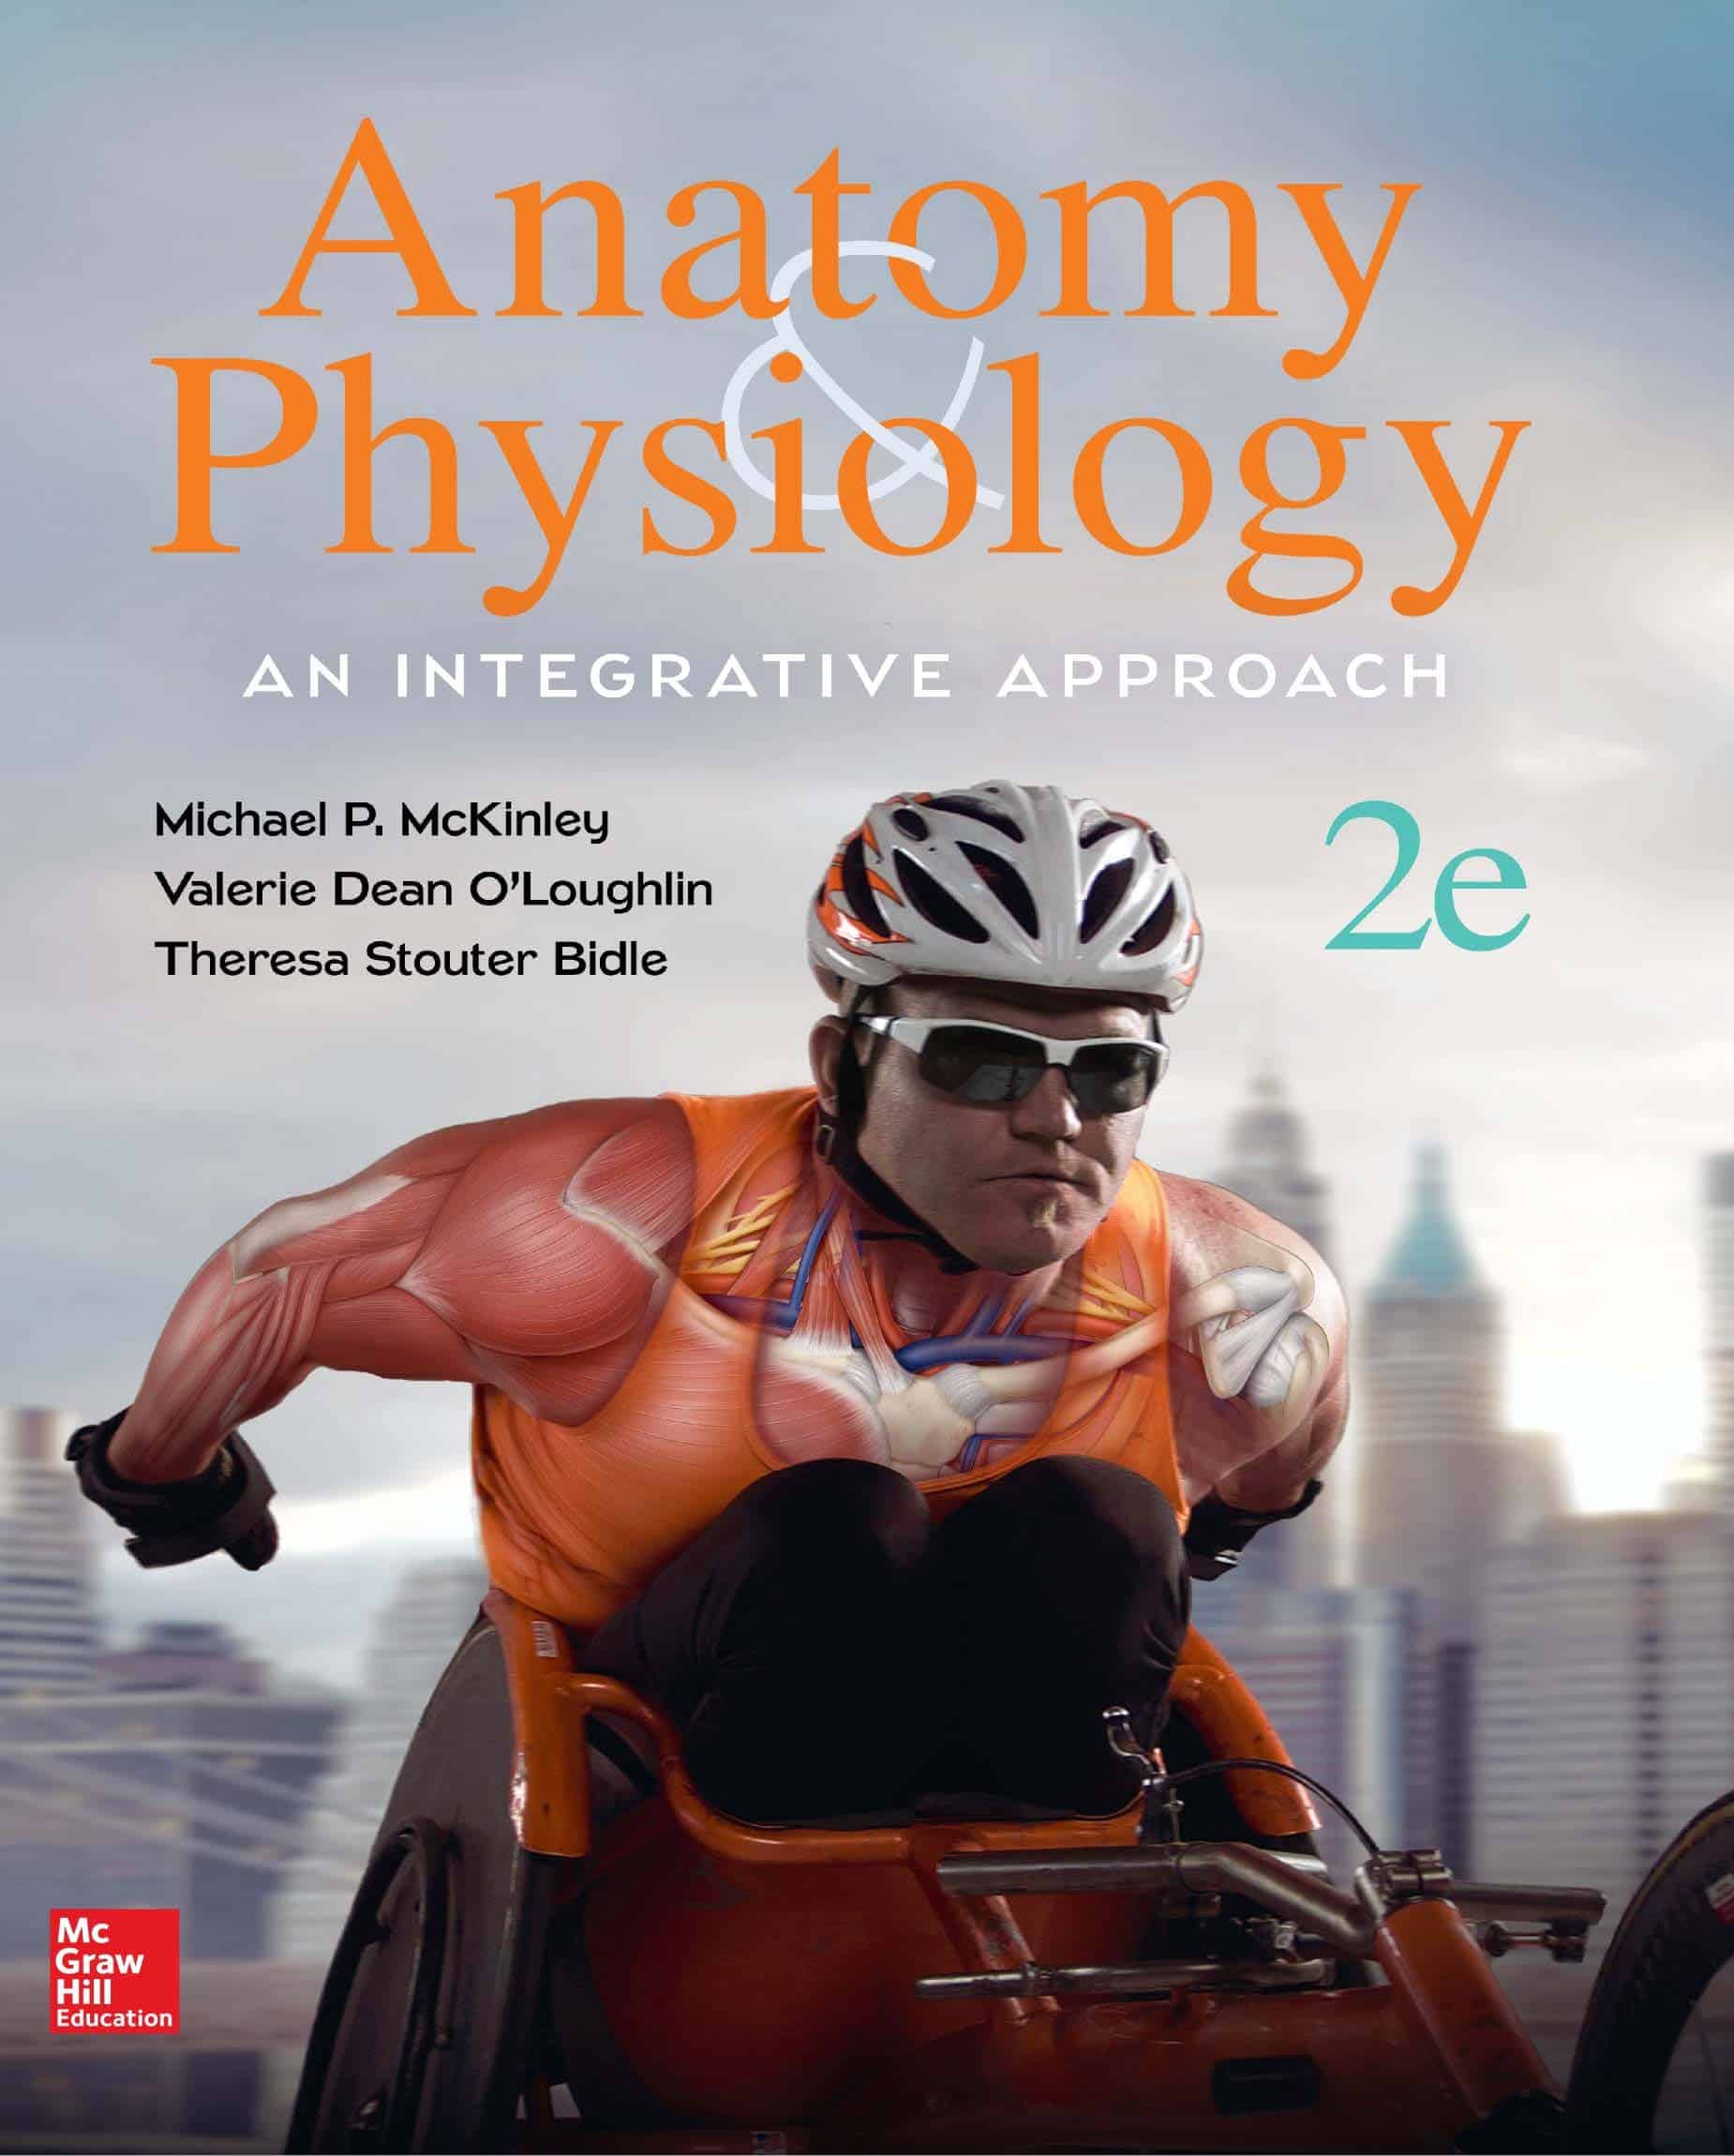 Anatomy and Physiology: An Integrative Approach (2nd Edition) by Michael McKinley, Theresa Bidle, and Valerie O’Loughlin